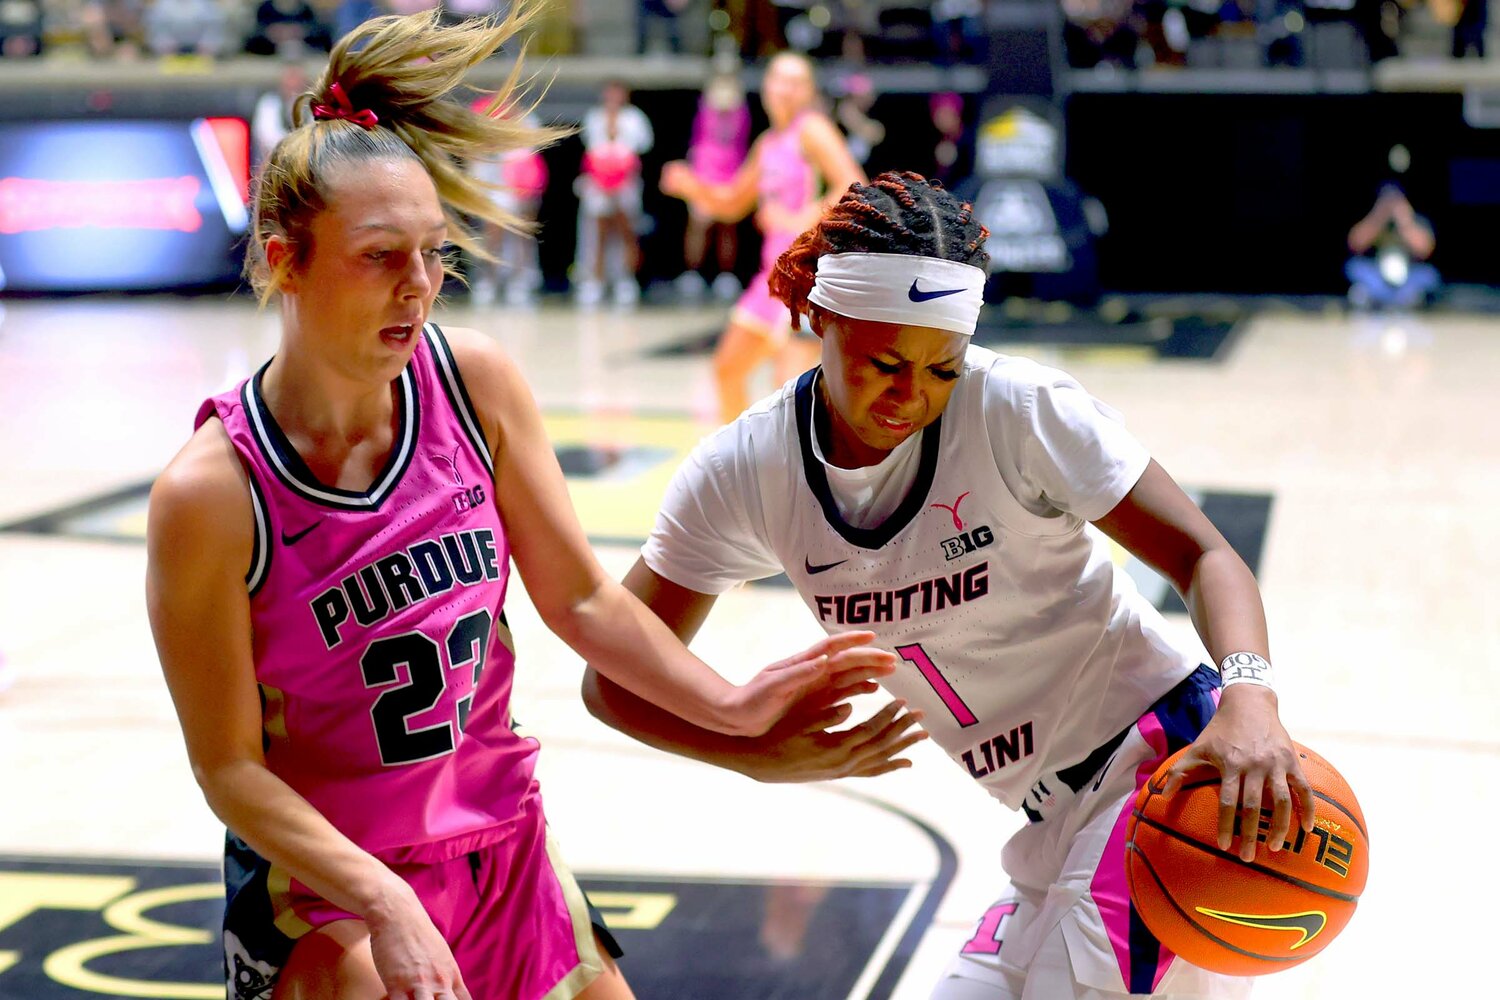 Genesis Bryant of Illinois - trying to dribble away from Abbey Ellis of Purdue